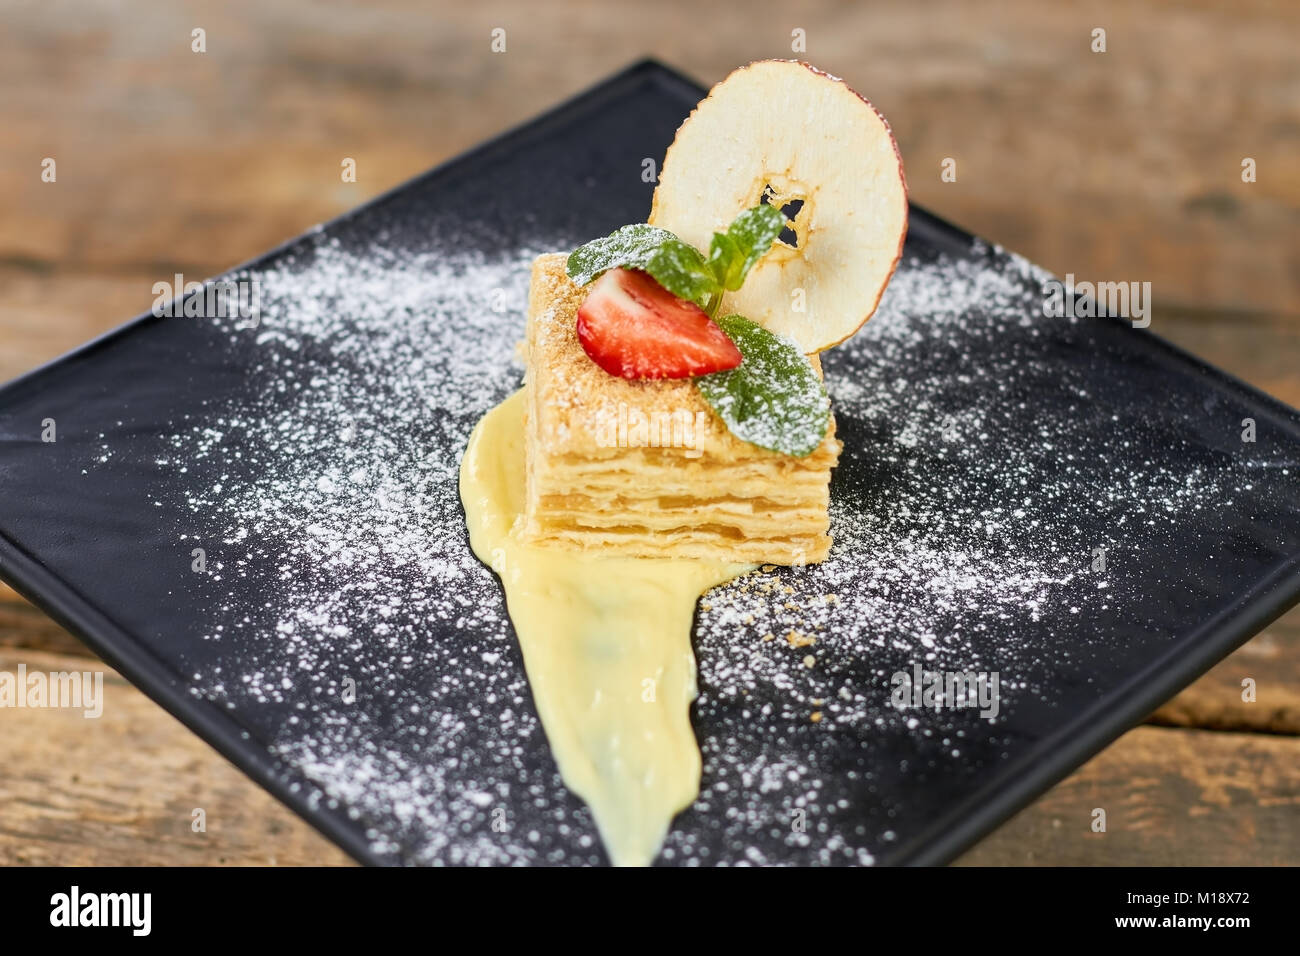 Cake Napoleon of puff pastry with sour cream on a black plate. Stock Photo